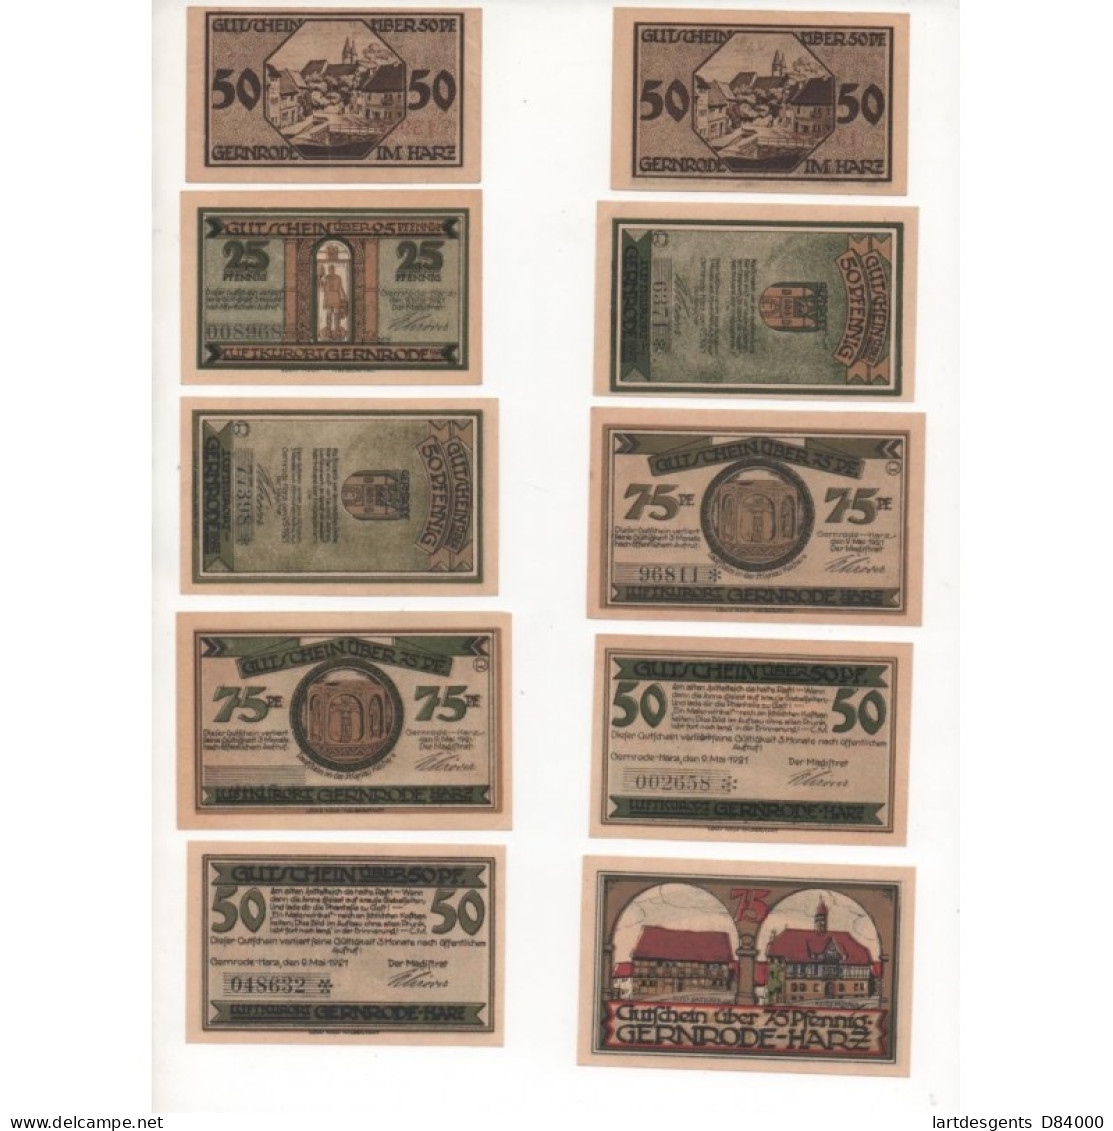 NOTGELD - GERRODE - 14 Different Notes - Different Color - 1921 (G026) - [11] Local Banknote Issues